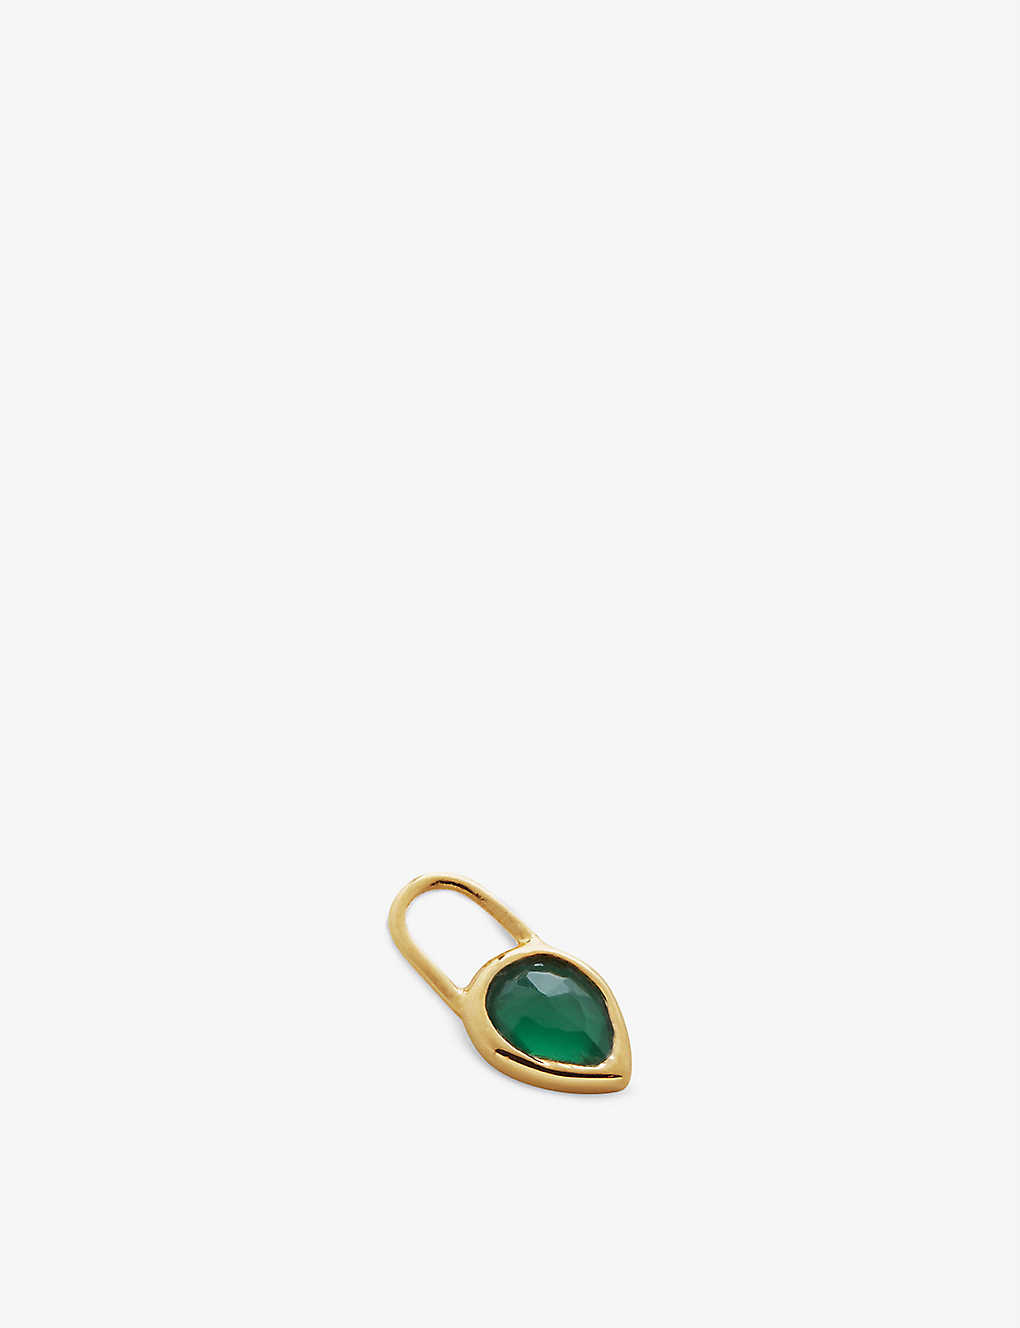 Monica Vinader Womens Green Teardrop 18ct Yellow Gold-plated Sterling Silver Vermeil Ear Charm